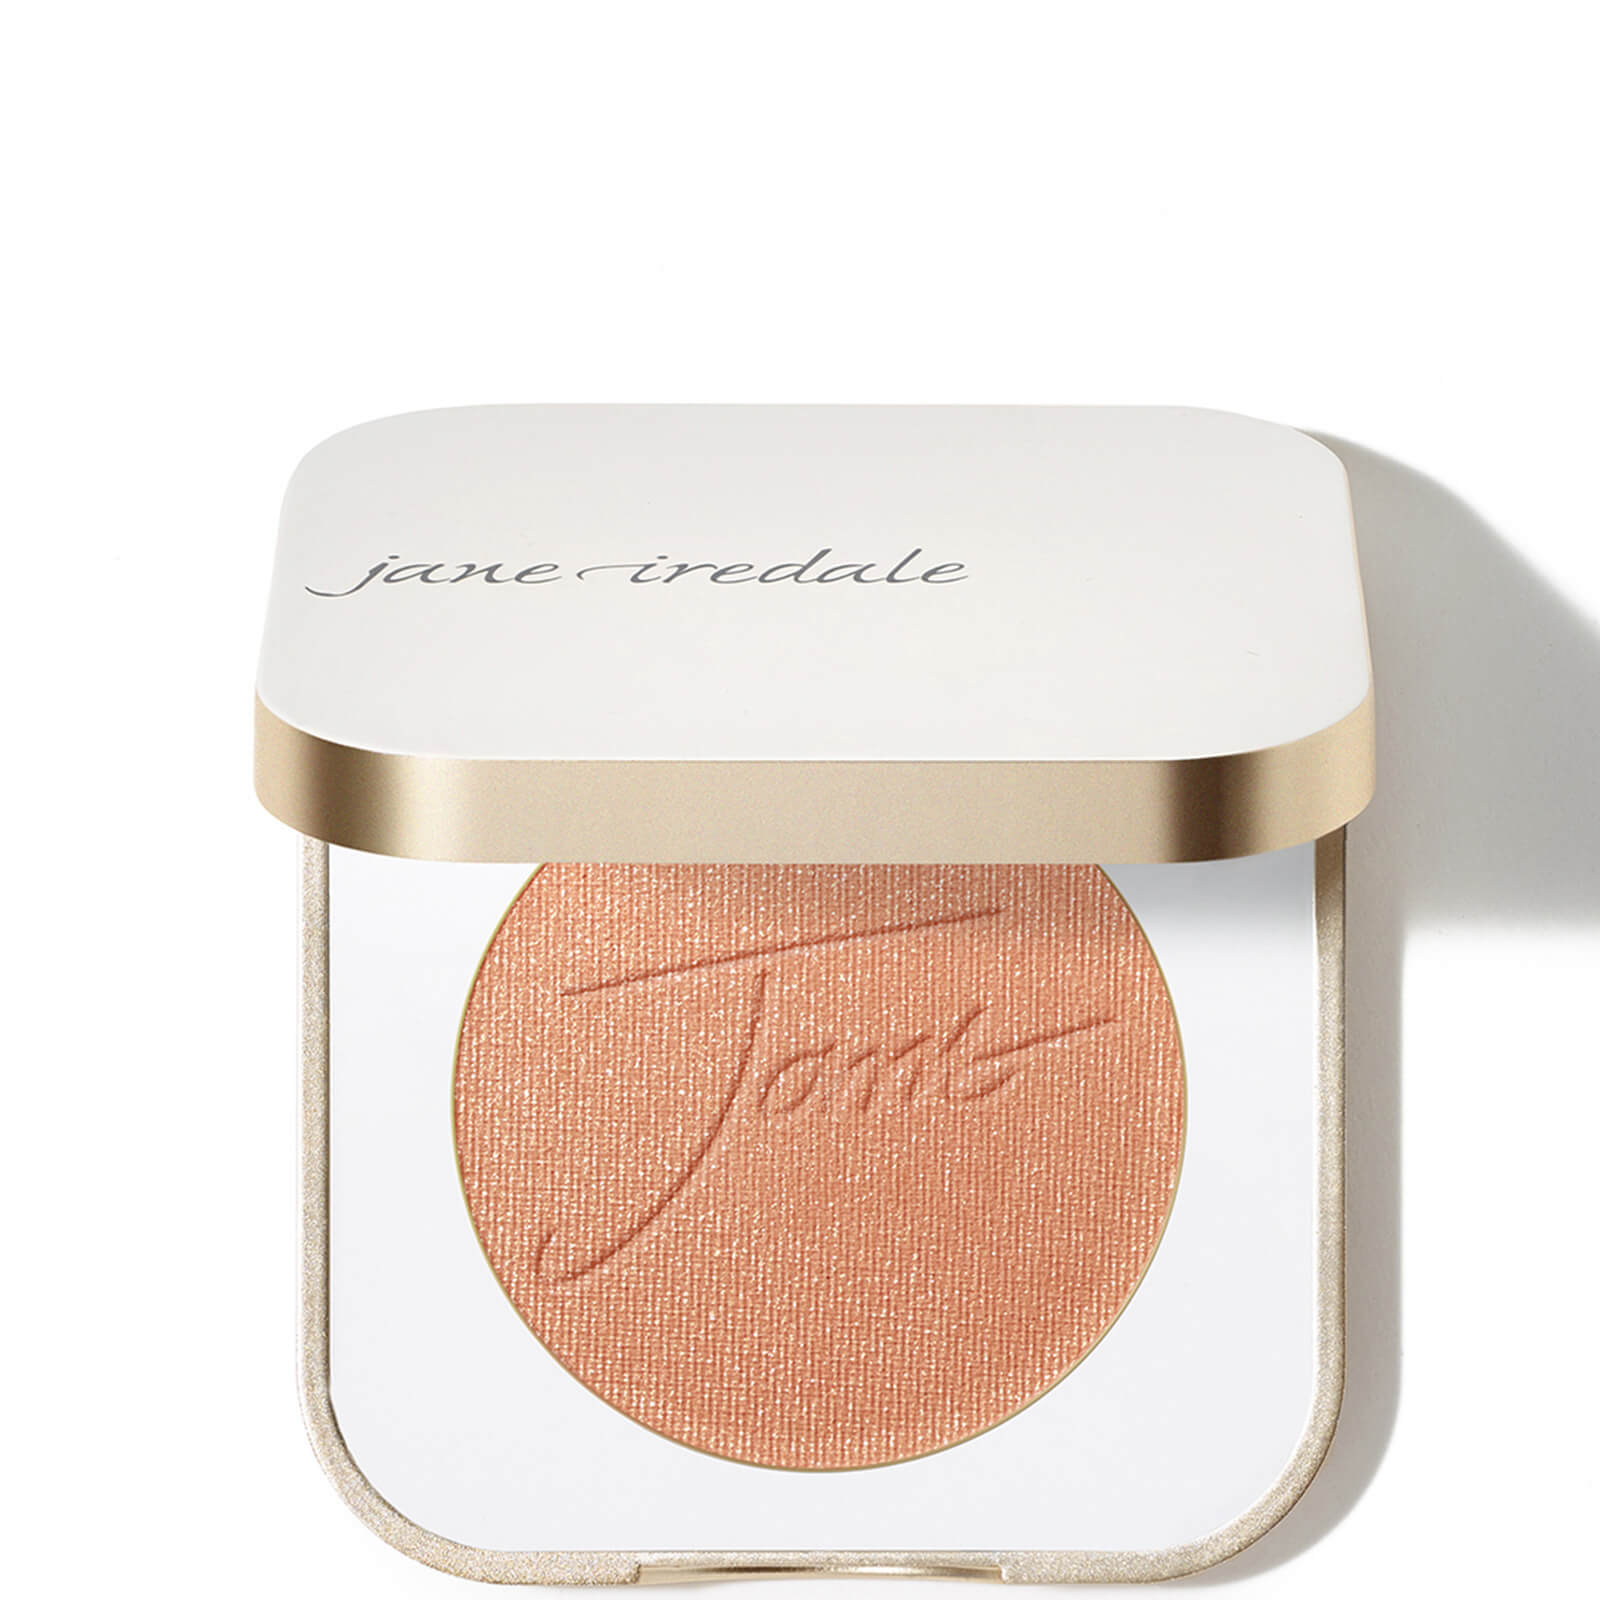 Jane Iredale Pure Pressed Blush 3.7g (various Shades) In Cherry Blossom